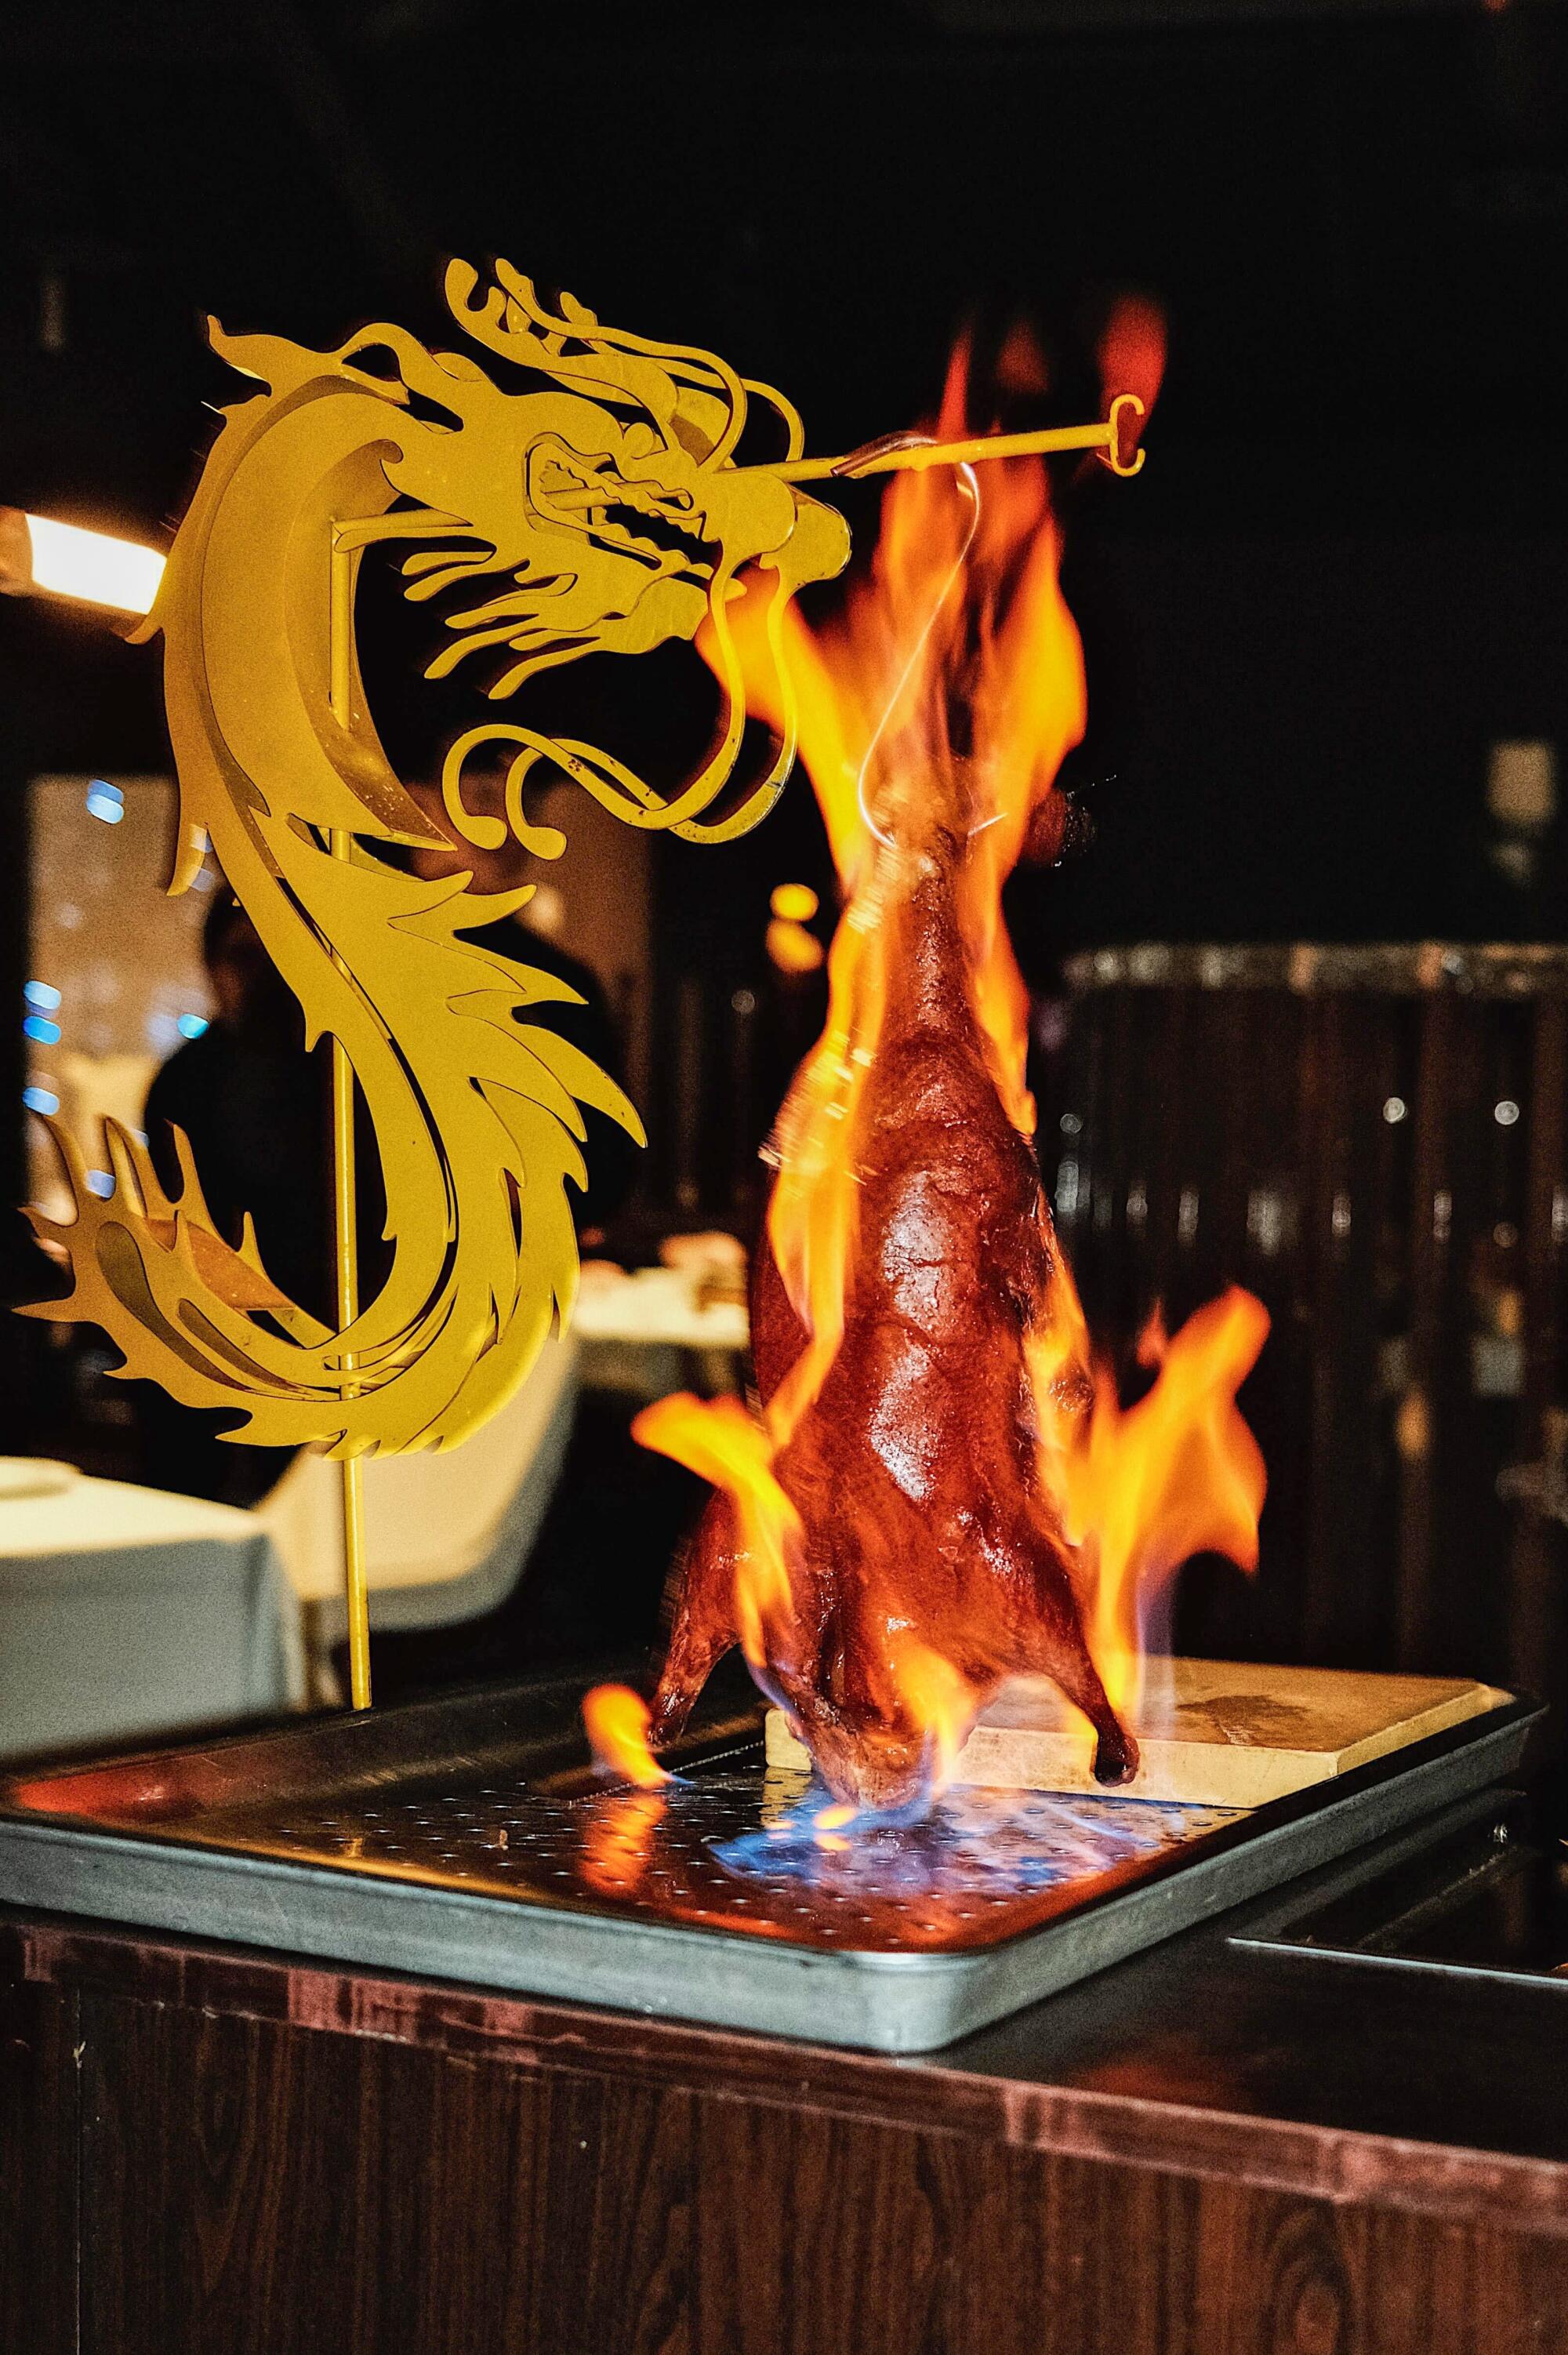 The roast duck arrives at the table, theatrically set ablaze.